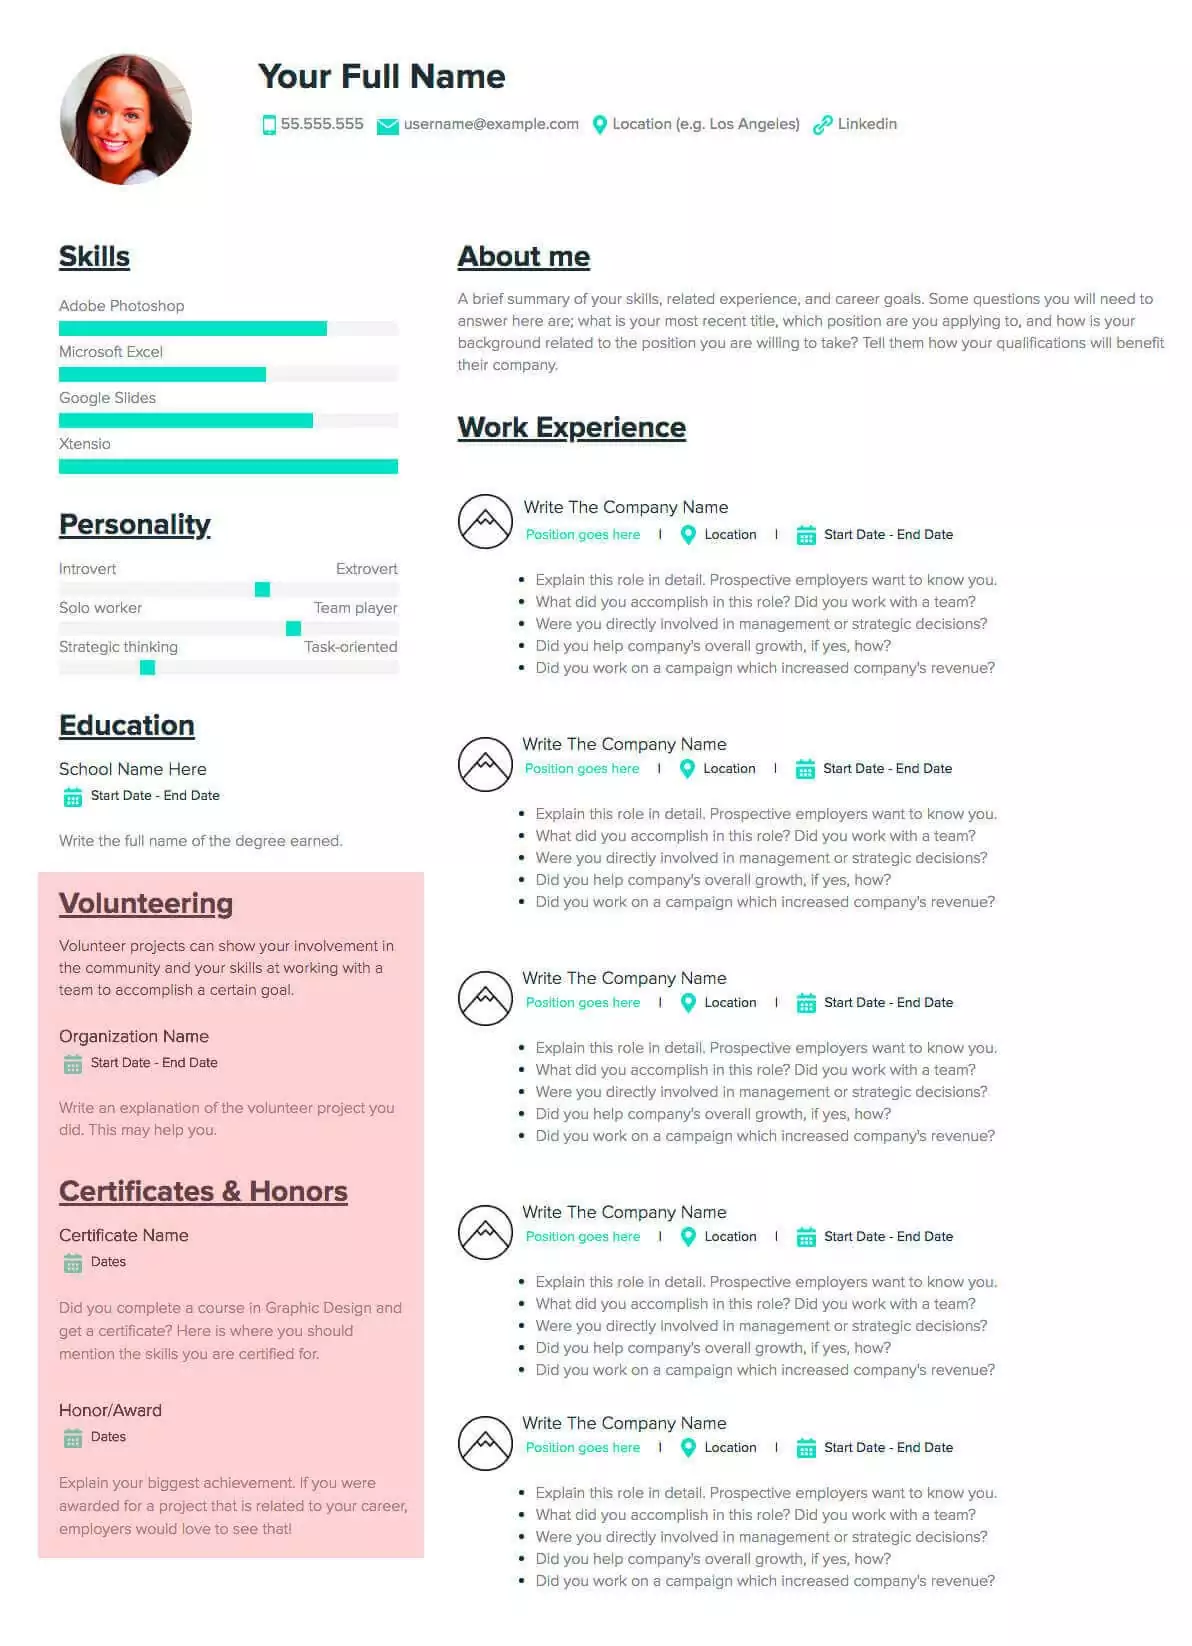 How To Make A Resume, Volunteering